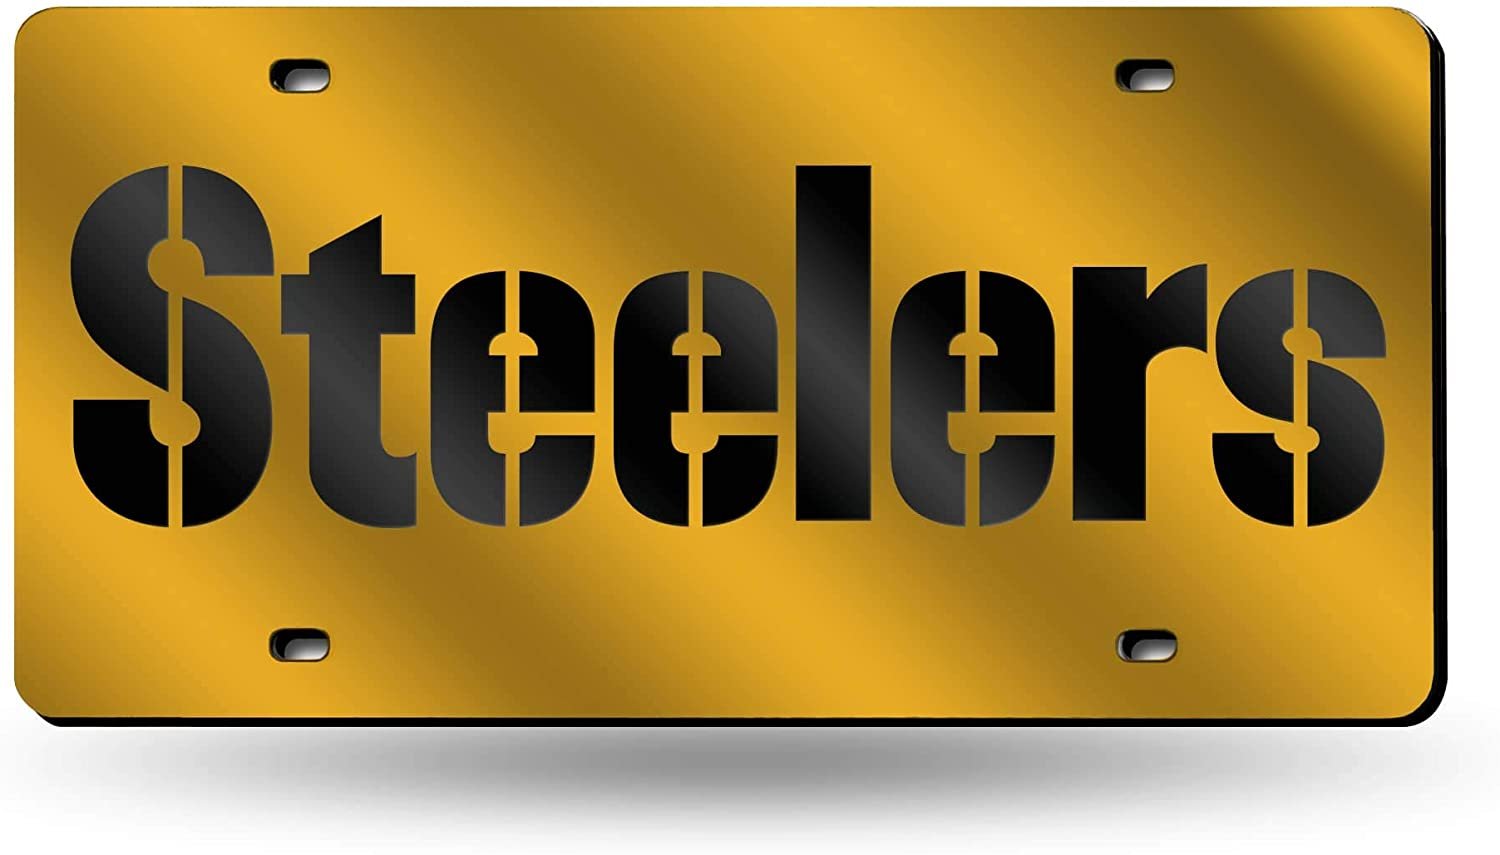 Pittsburgh Steelers Premium Laser Cut Tag License Plate, Yellow Script, Mirrored Acrylic Inlaid, 12x6 Inch